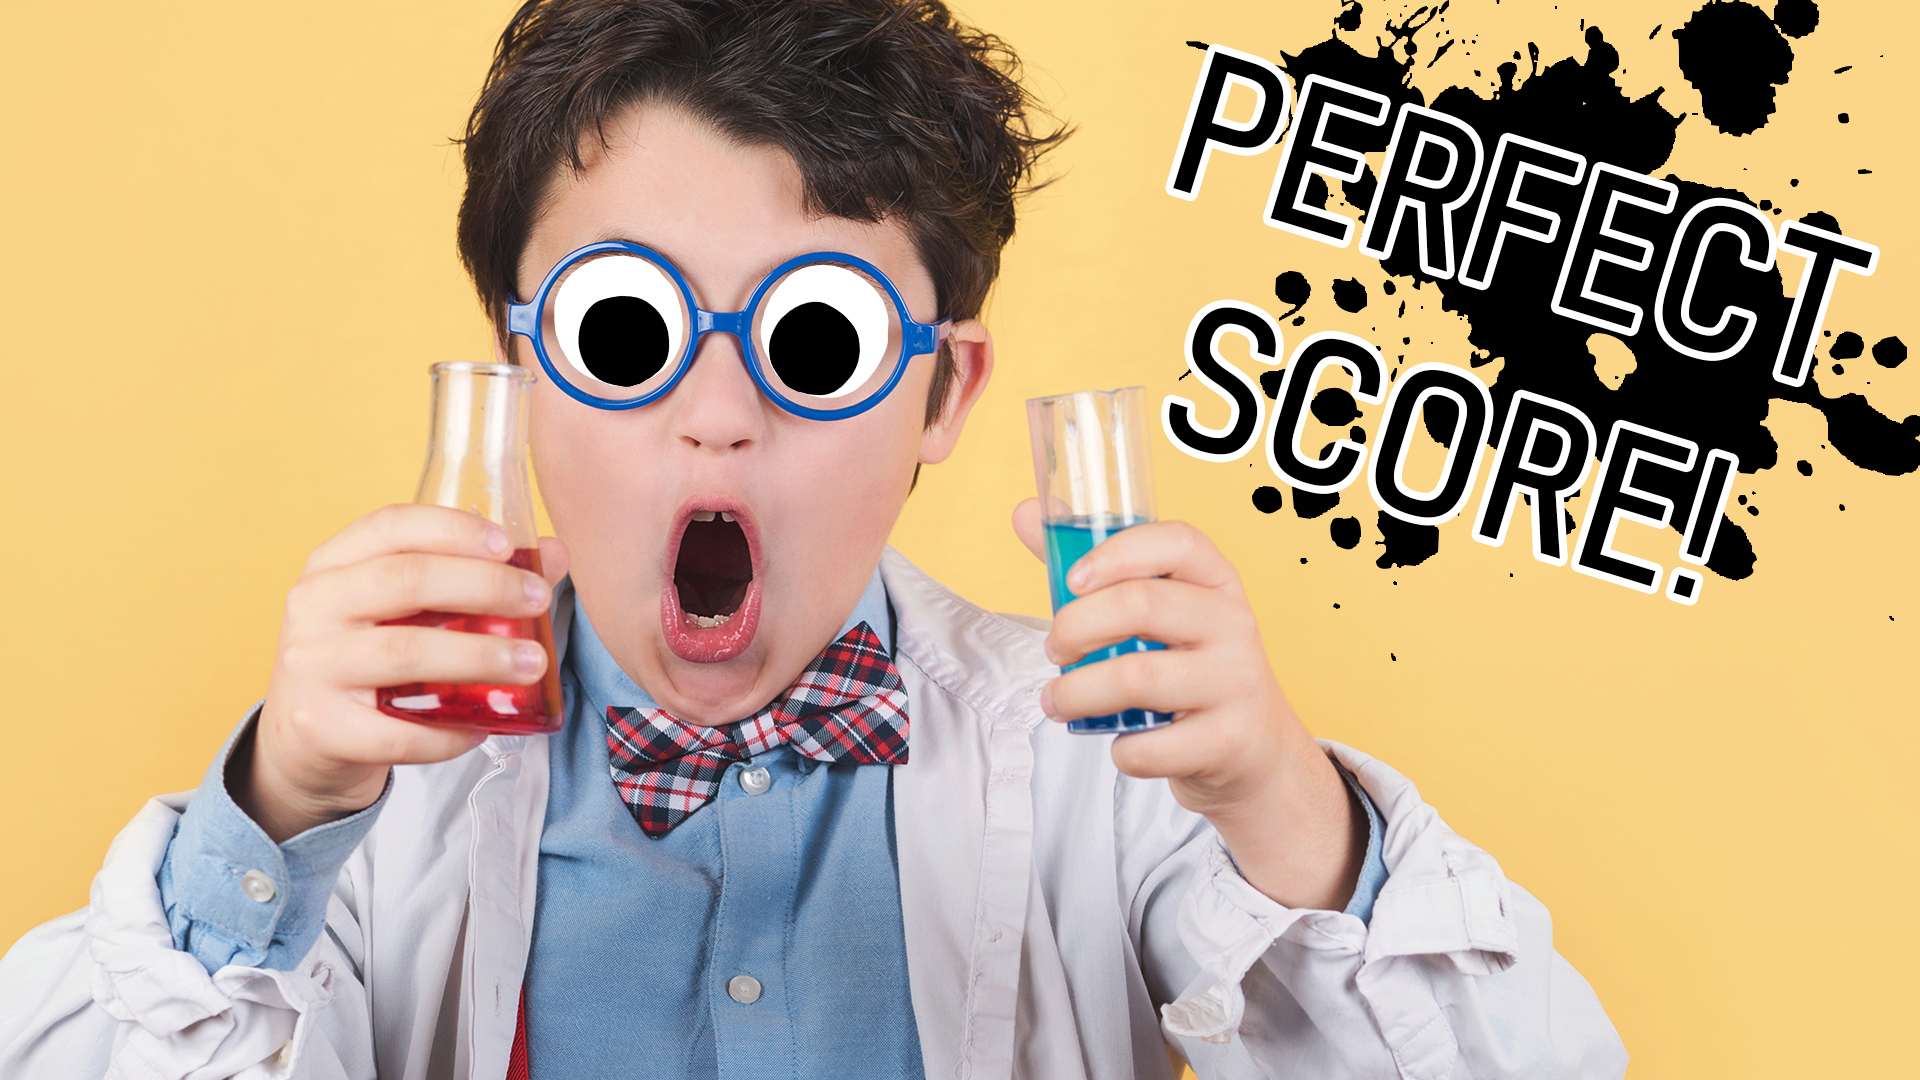 Are you smarter than your kid? Take this quiz to find out